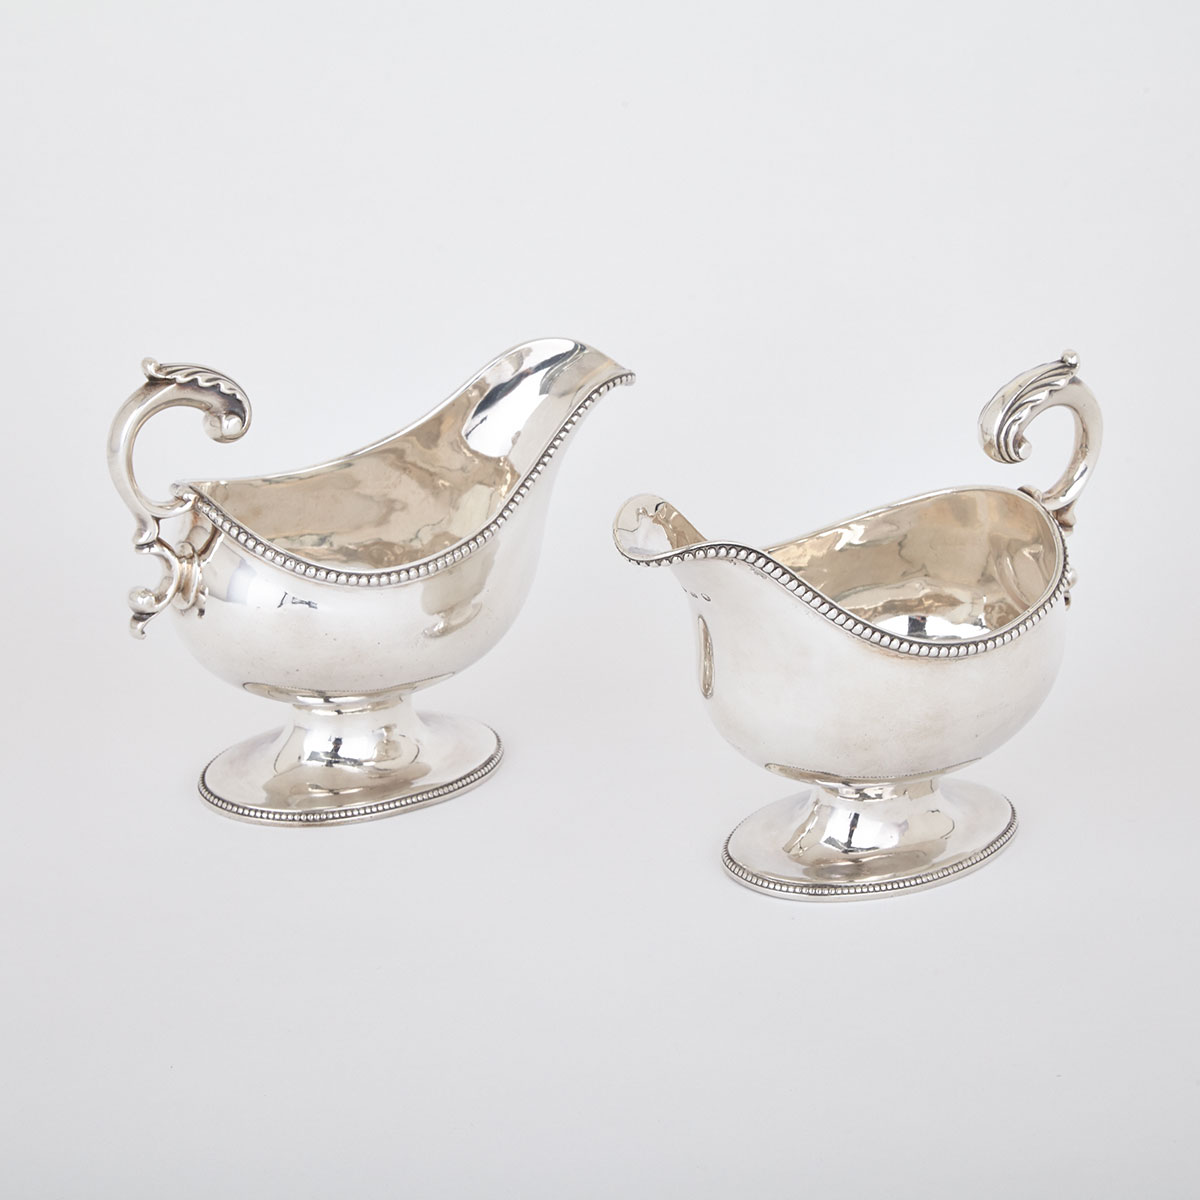 Pair of George III Silver Sauce Boats, London, 1800